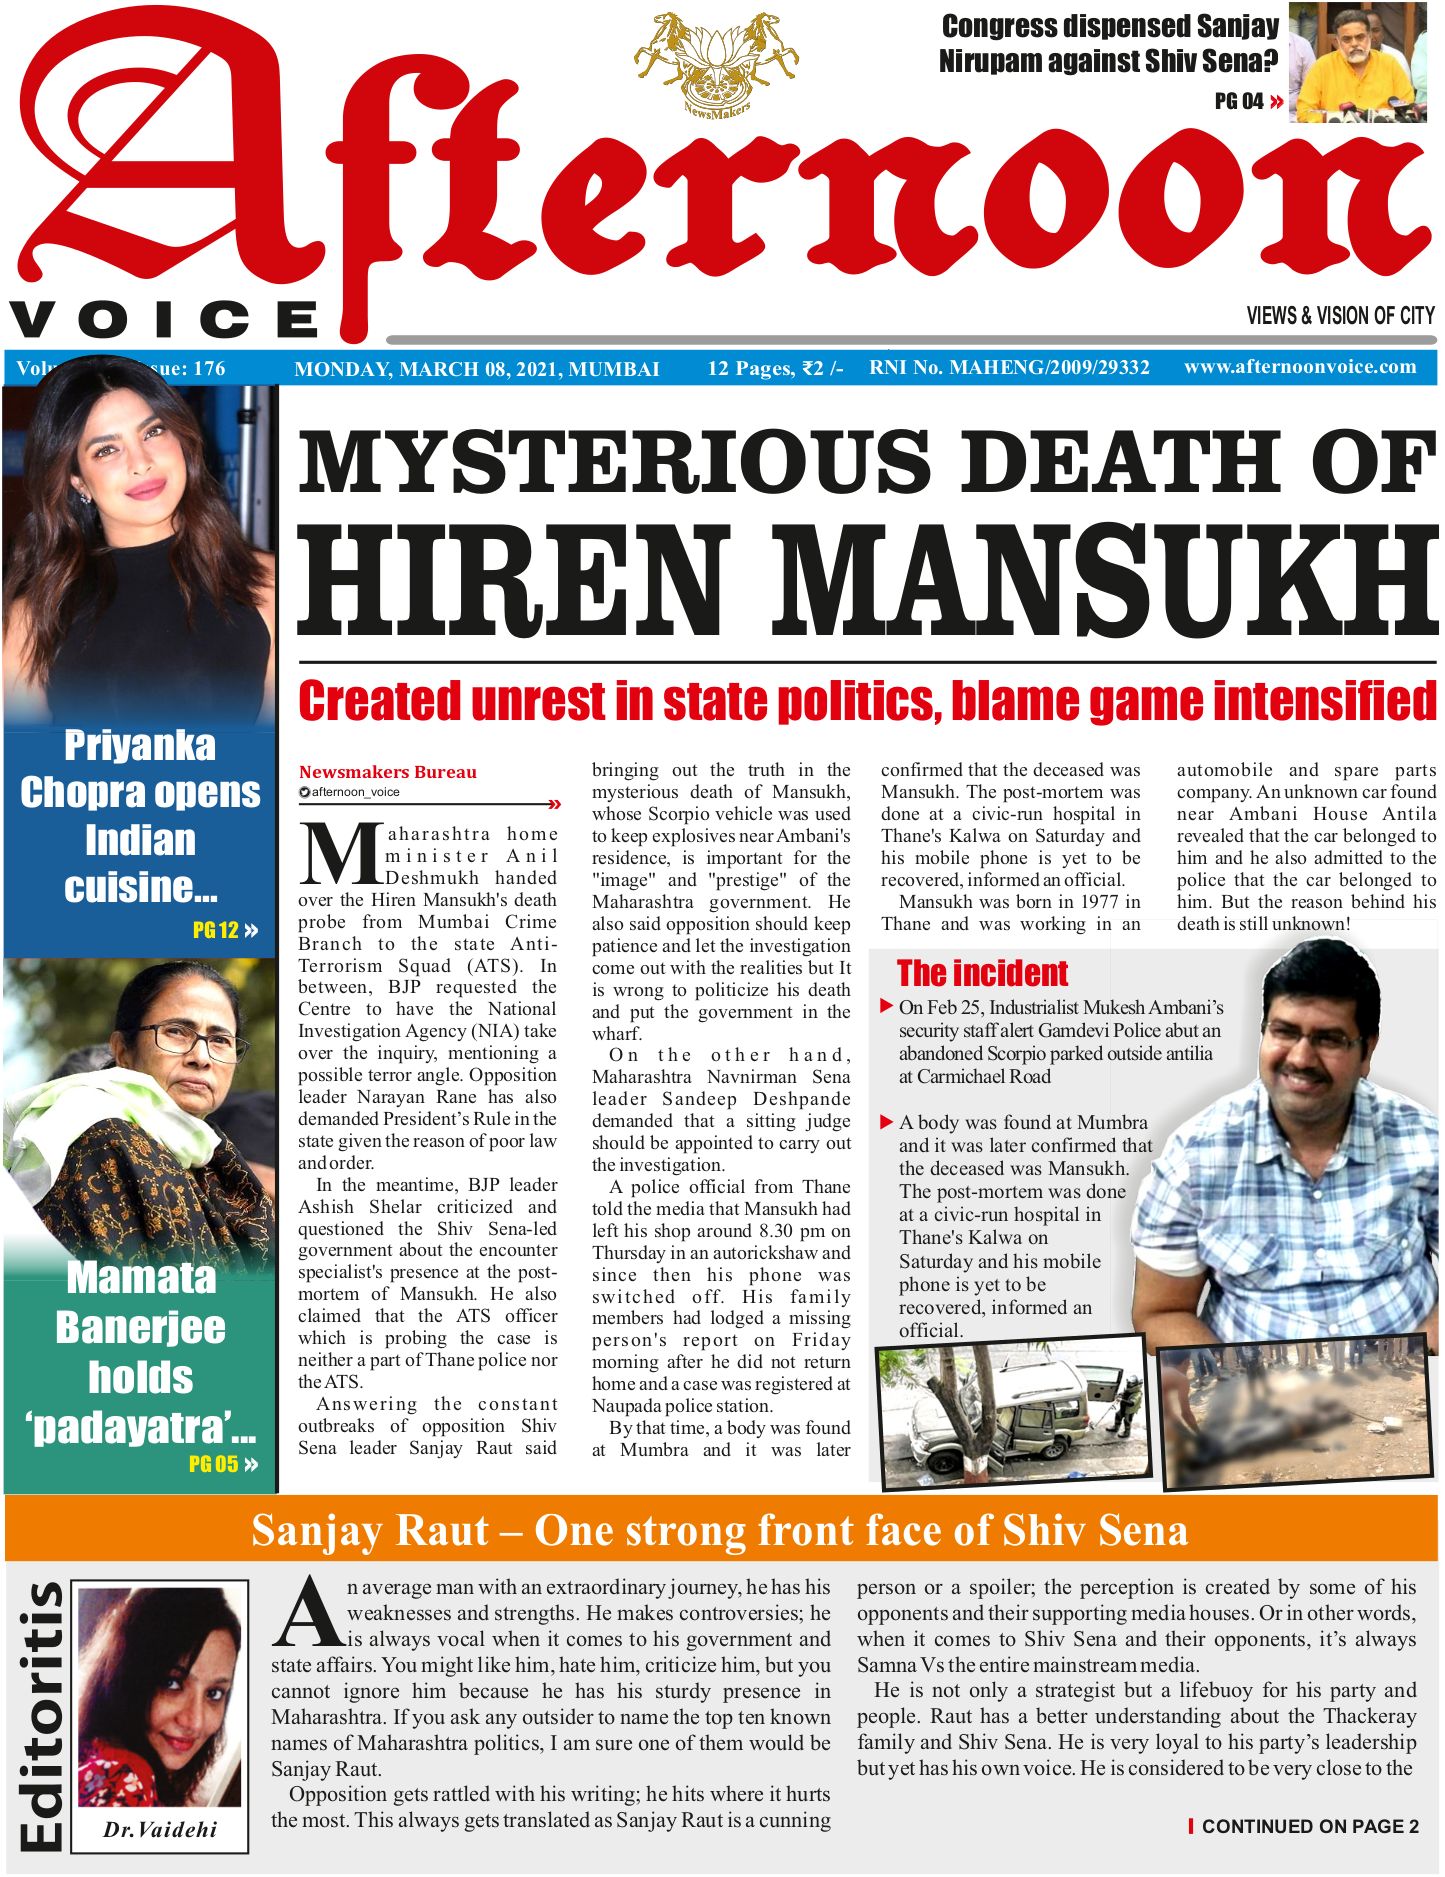 08 March 21 Page 1 Online English News Paper Daily News Epaper Today Newspaper